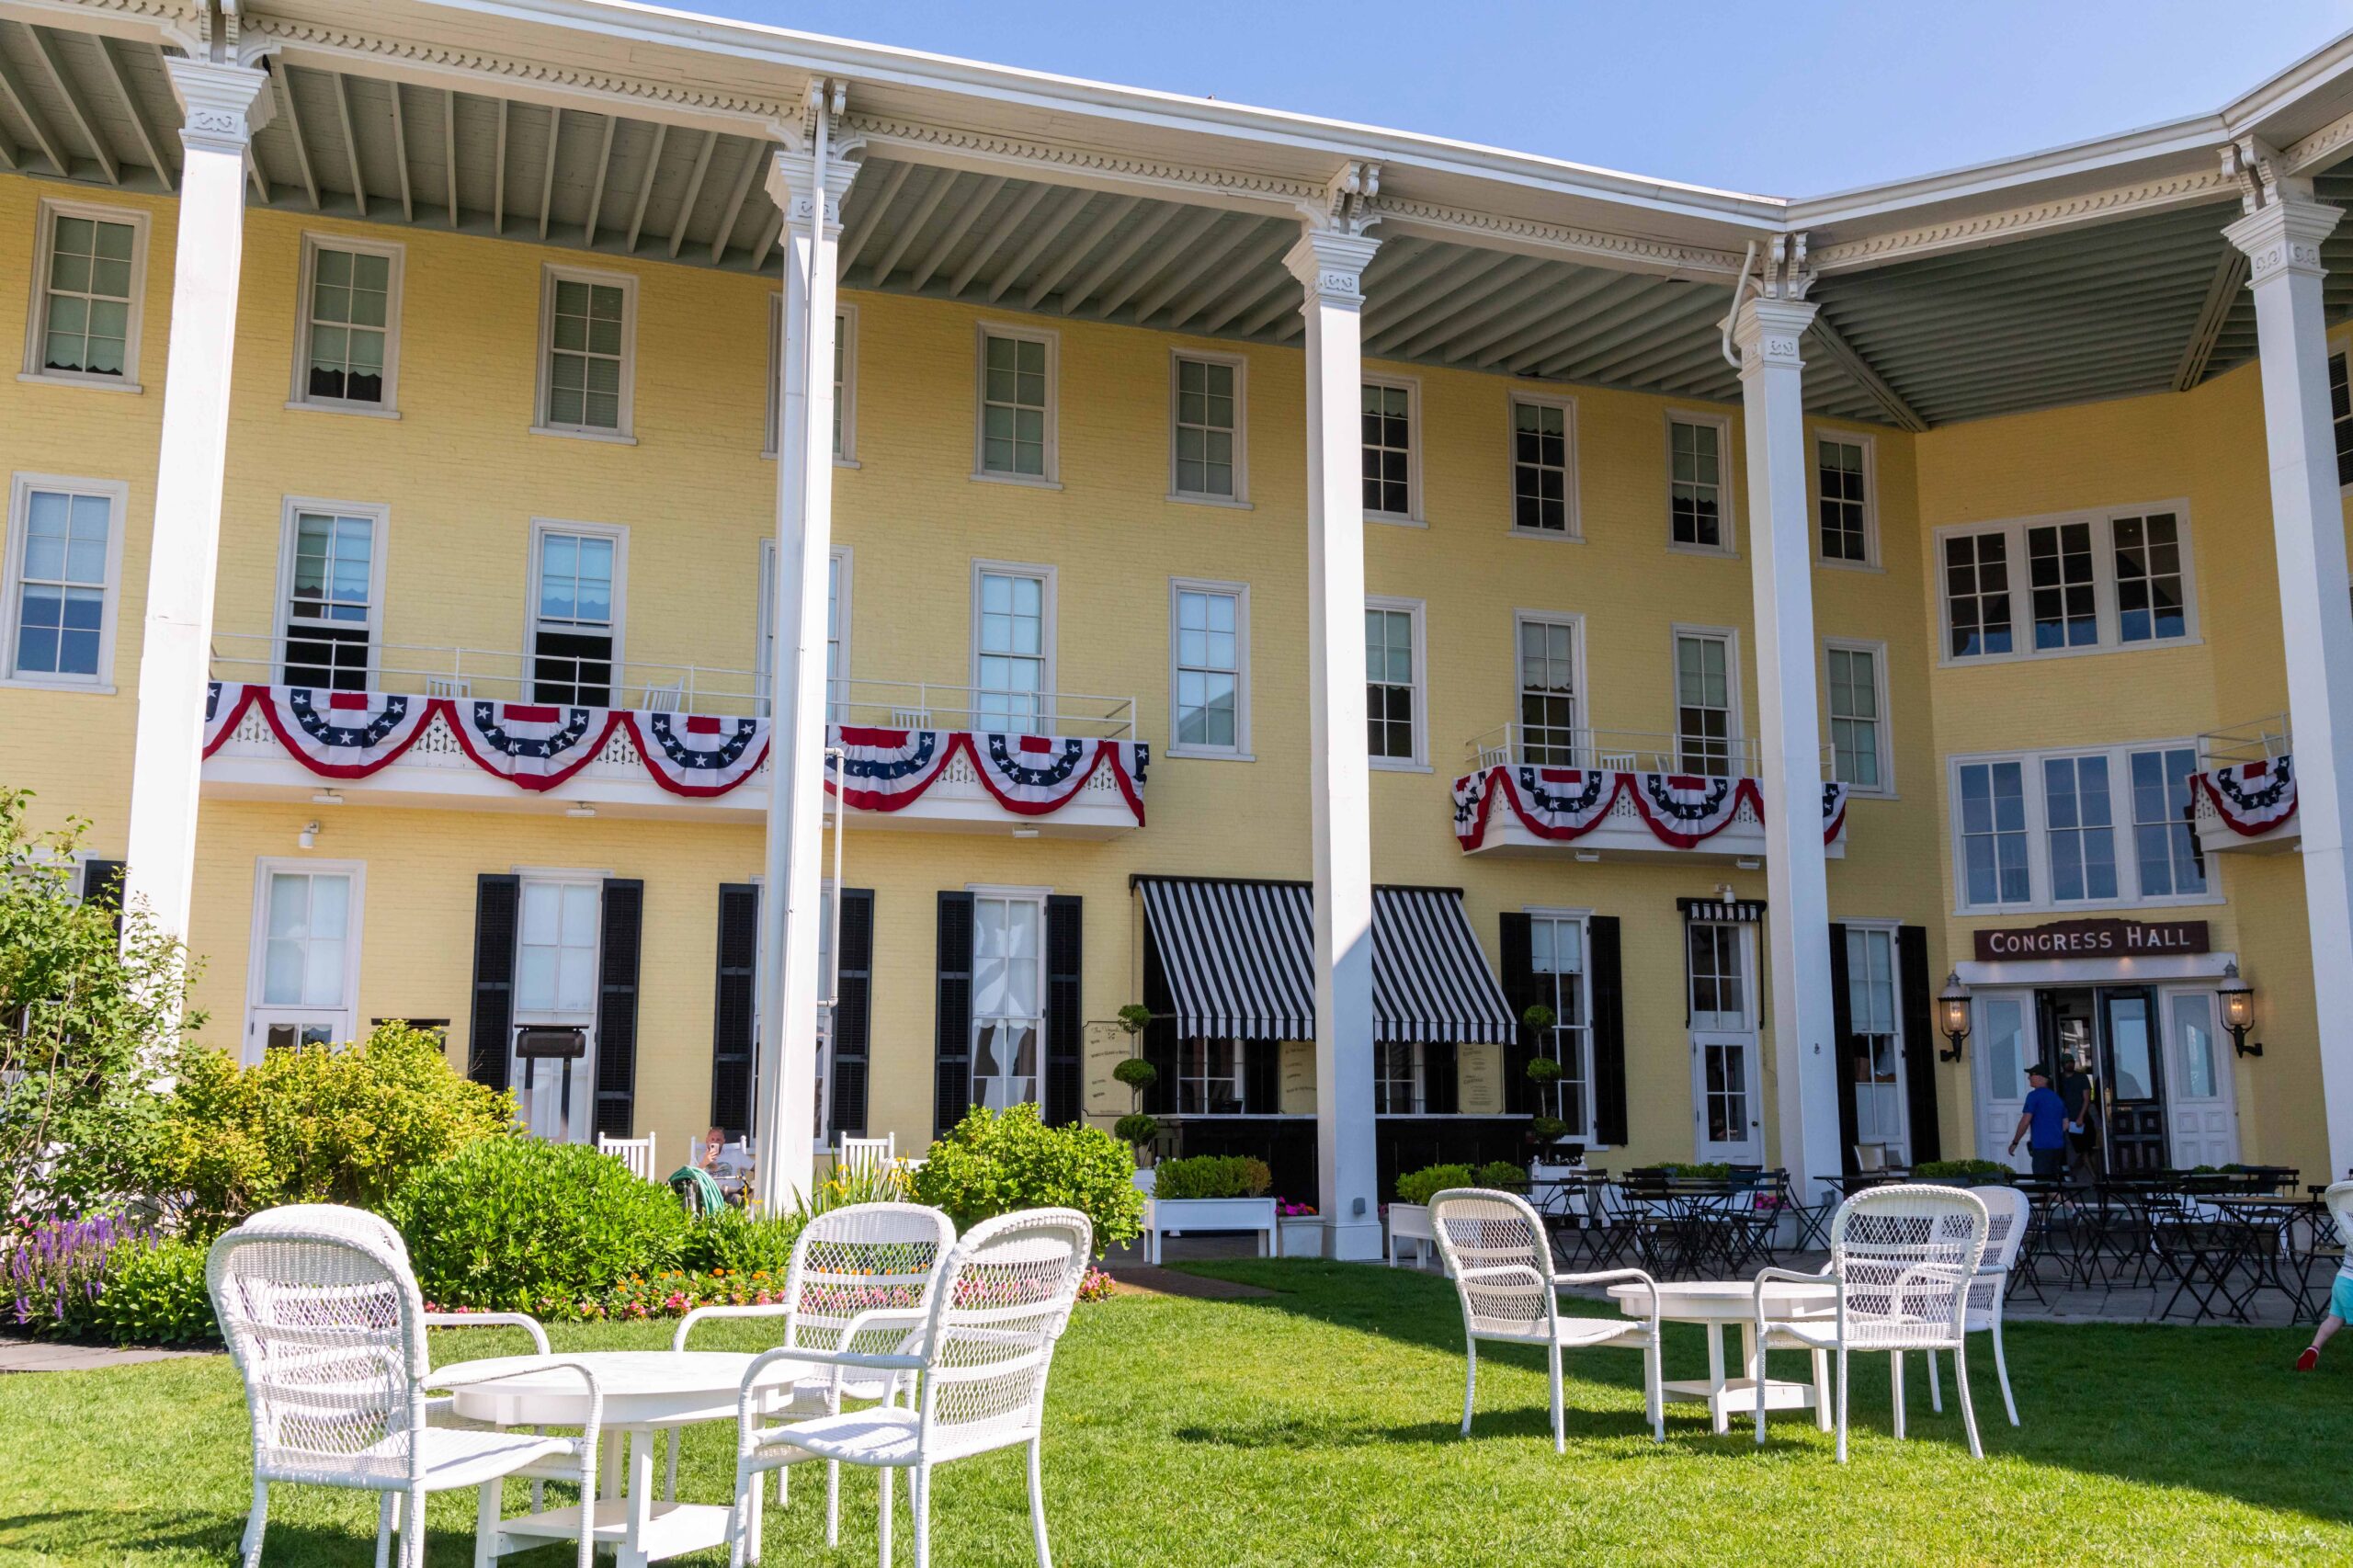 Tables and chairs on the front lawn of Congress Hall with American Flag bunting hung up on the decks of second floor rooms